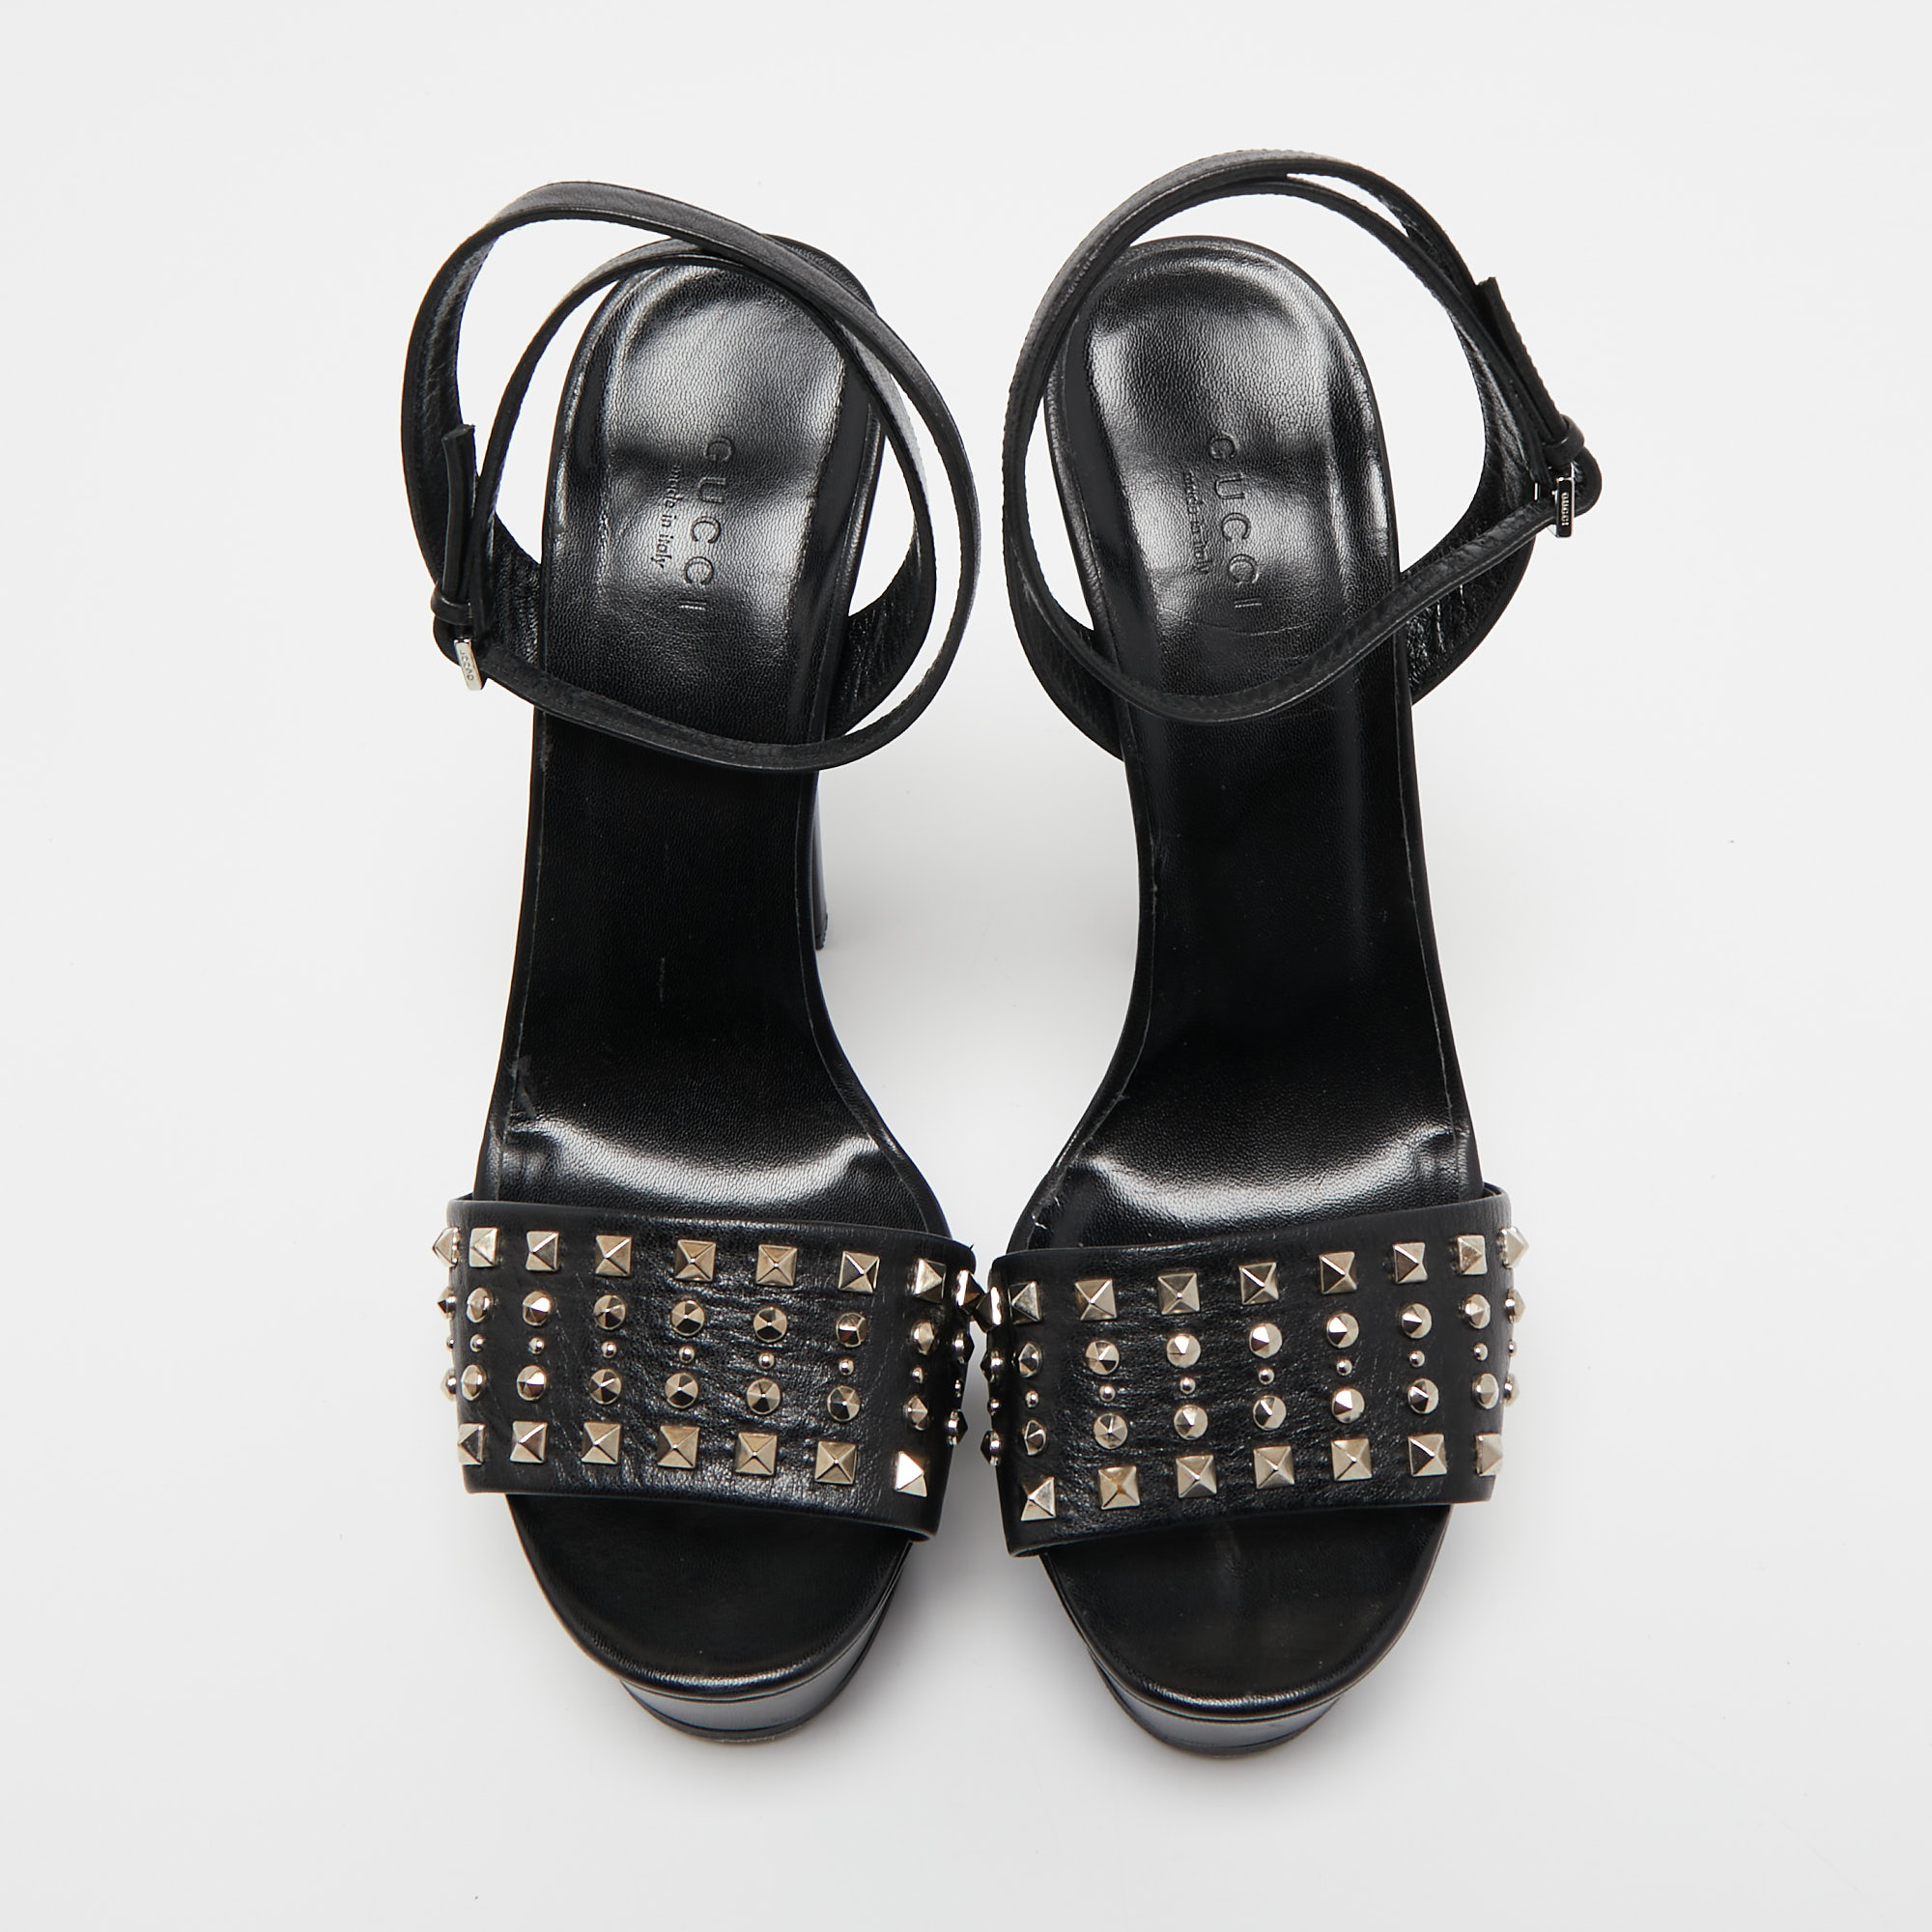 Gucci Black Studded Leather Leila Ankle Strap Sandals Size 40